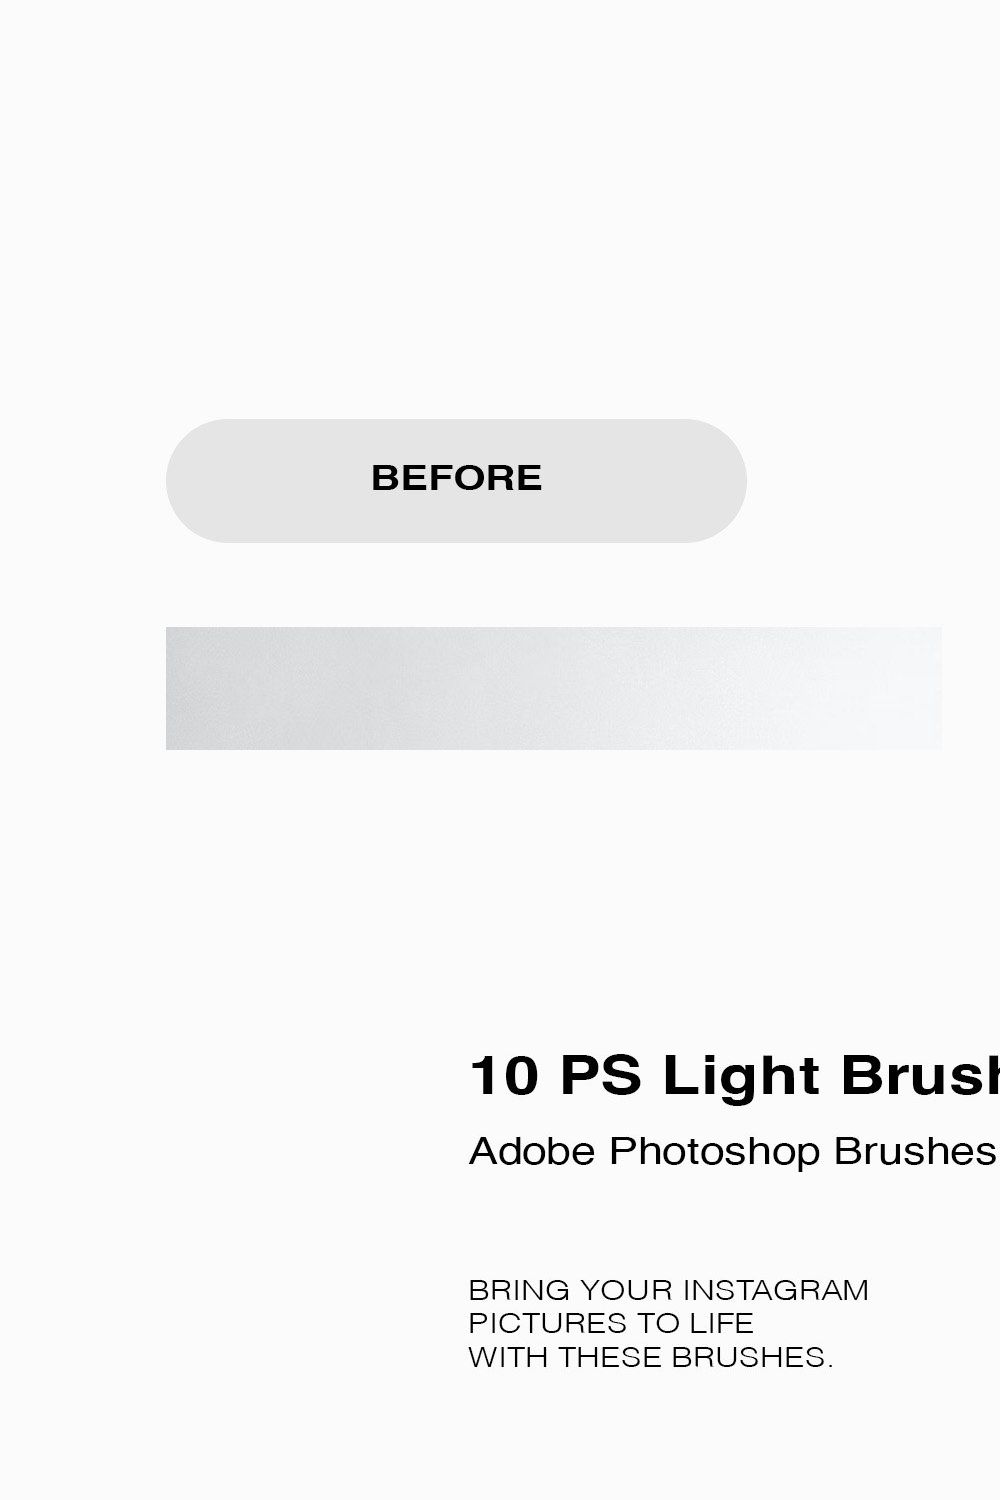 10 PS Light Brushes pinterest preview image.